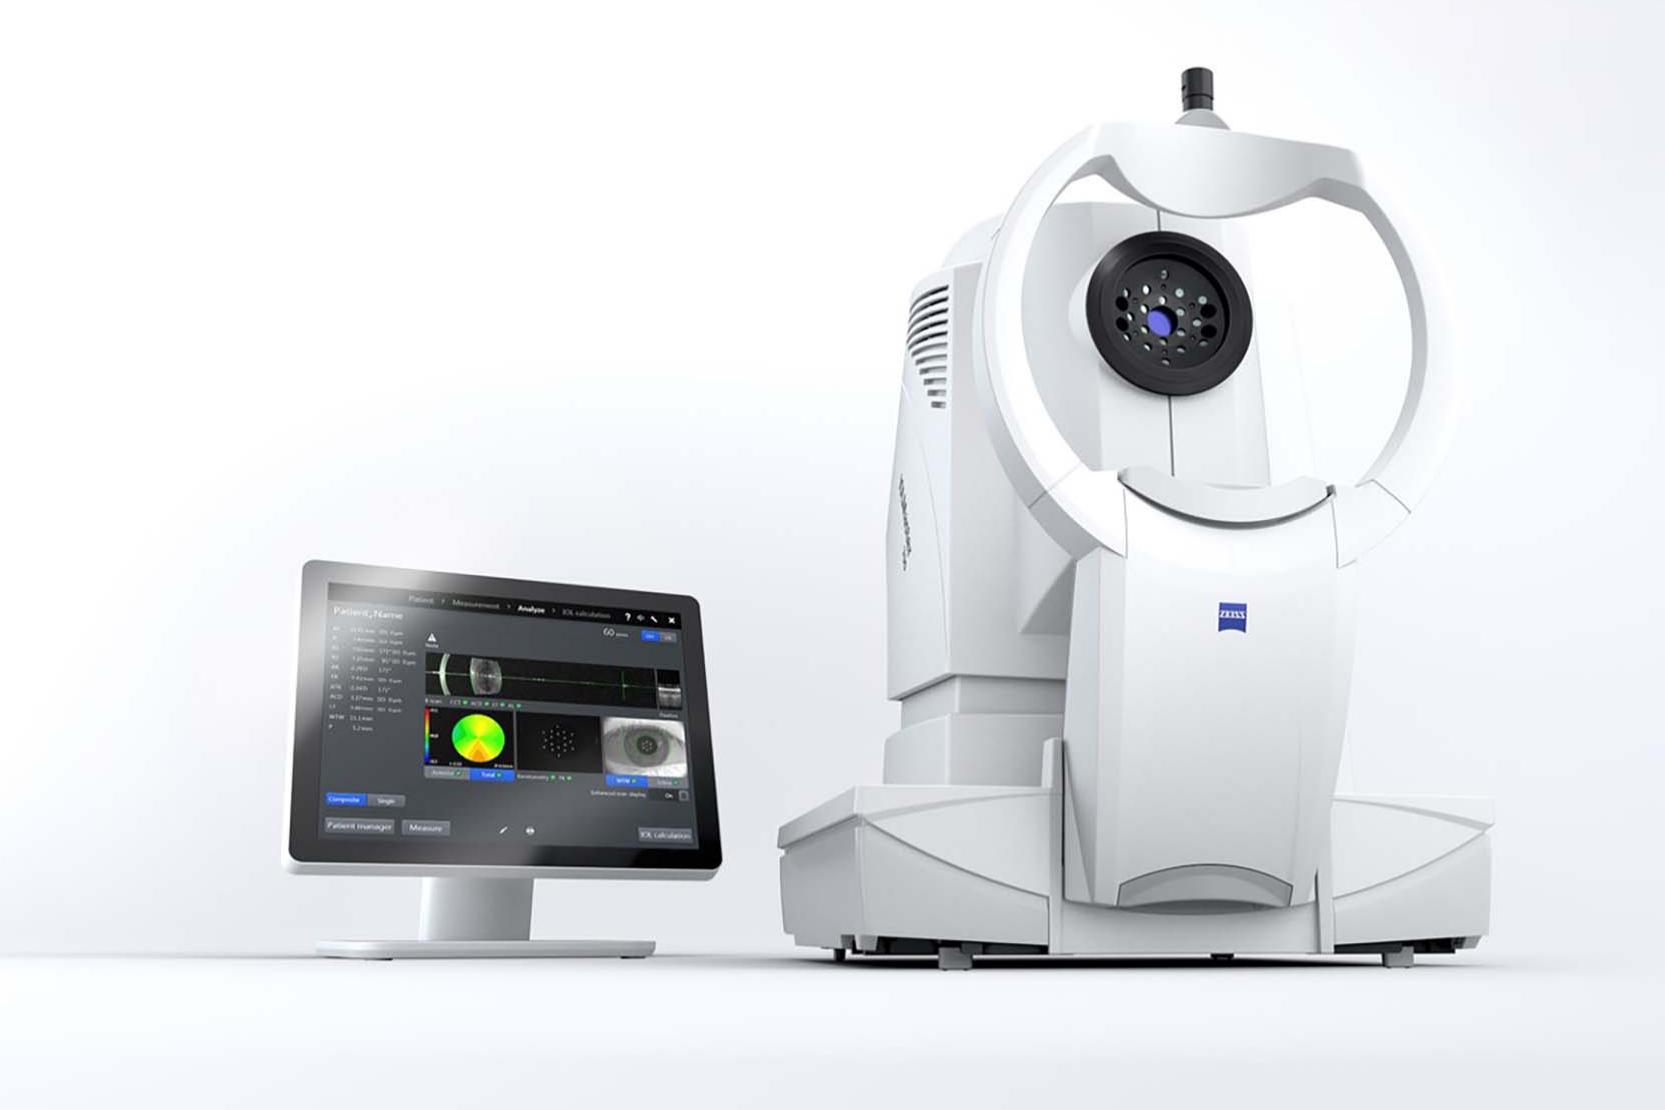 IOLMaster® 700 with Central Topography (CT)